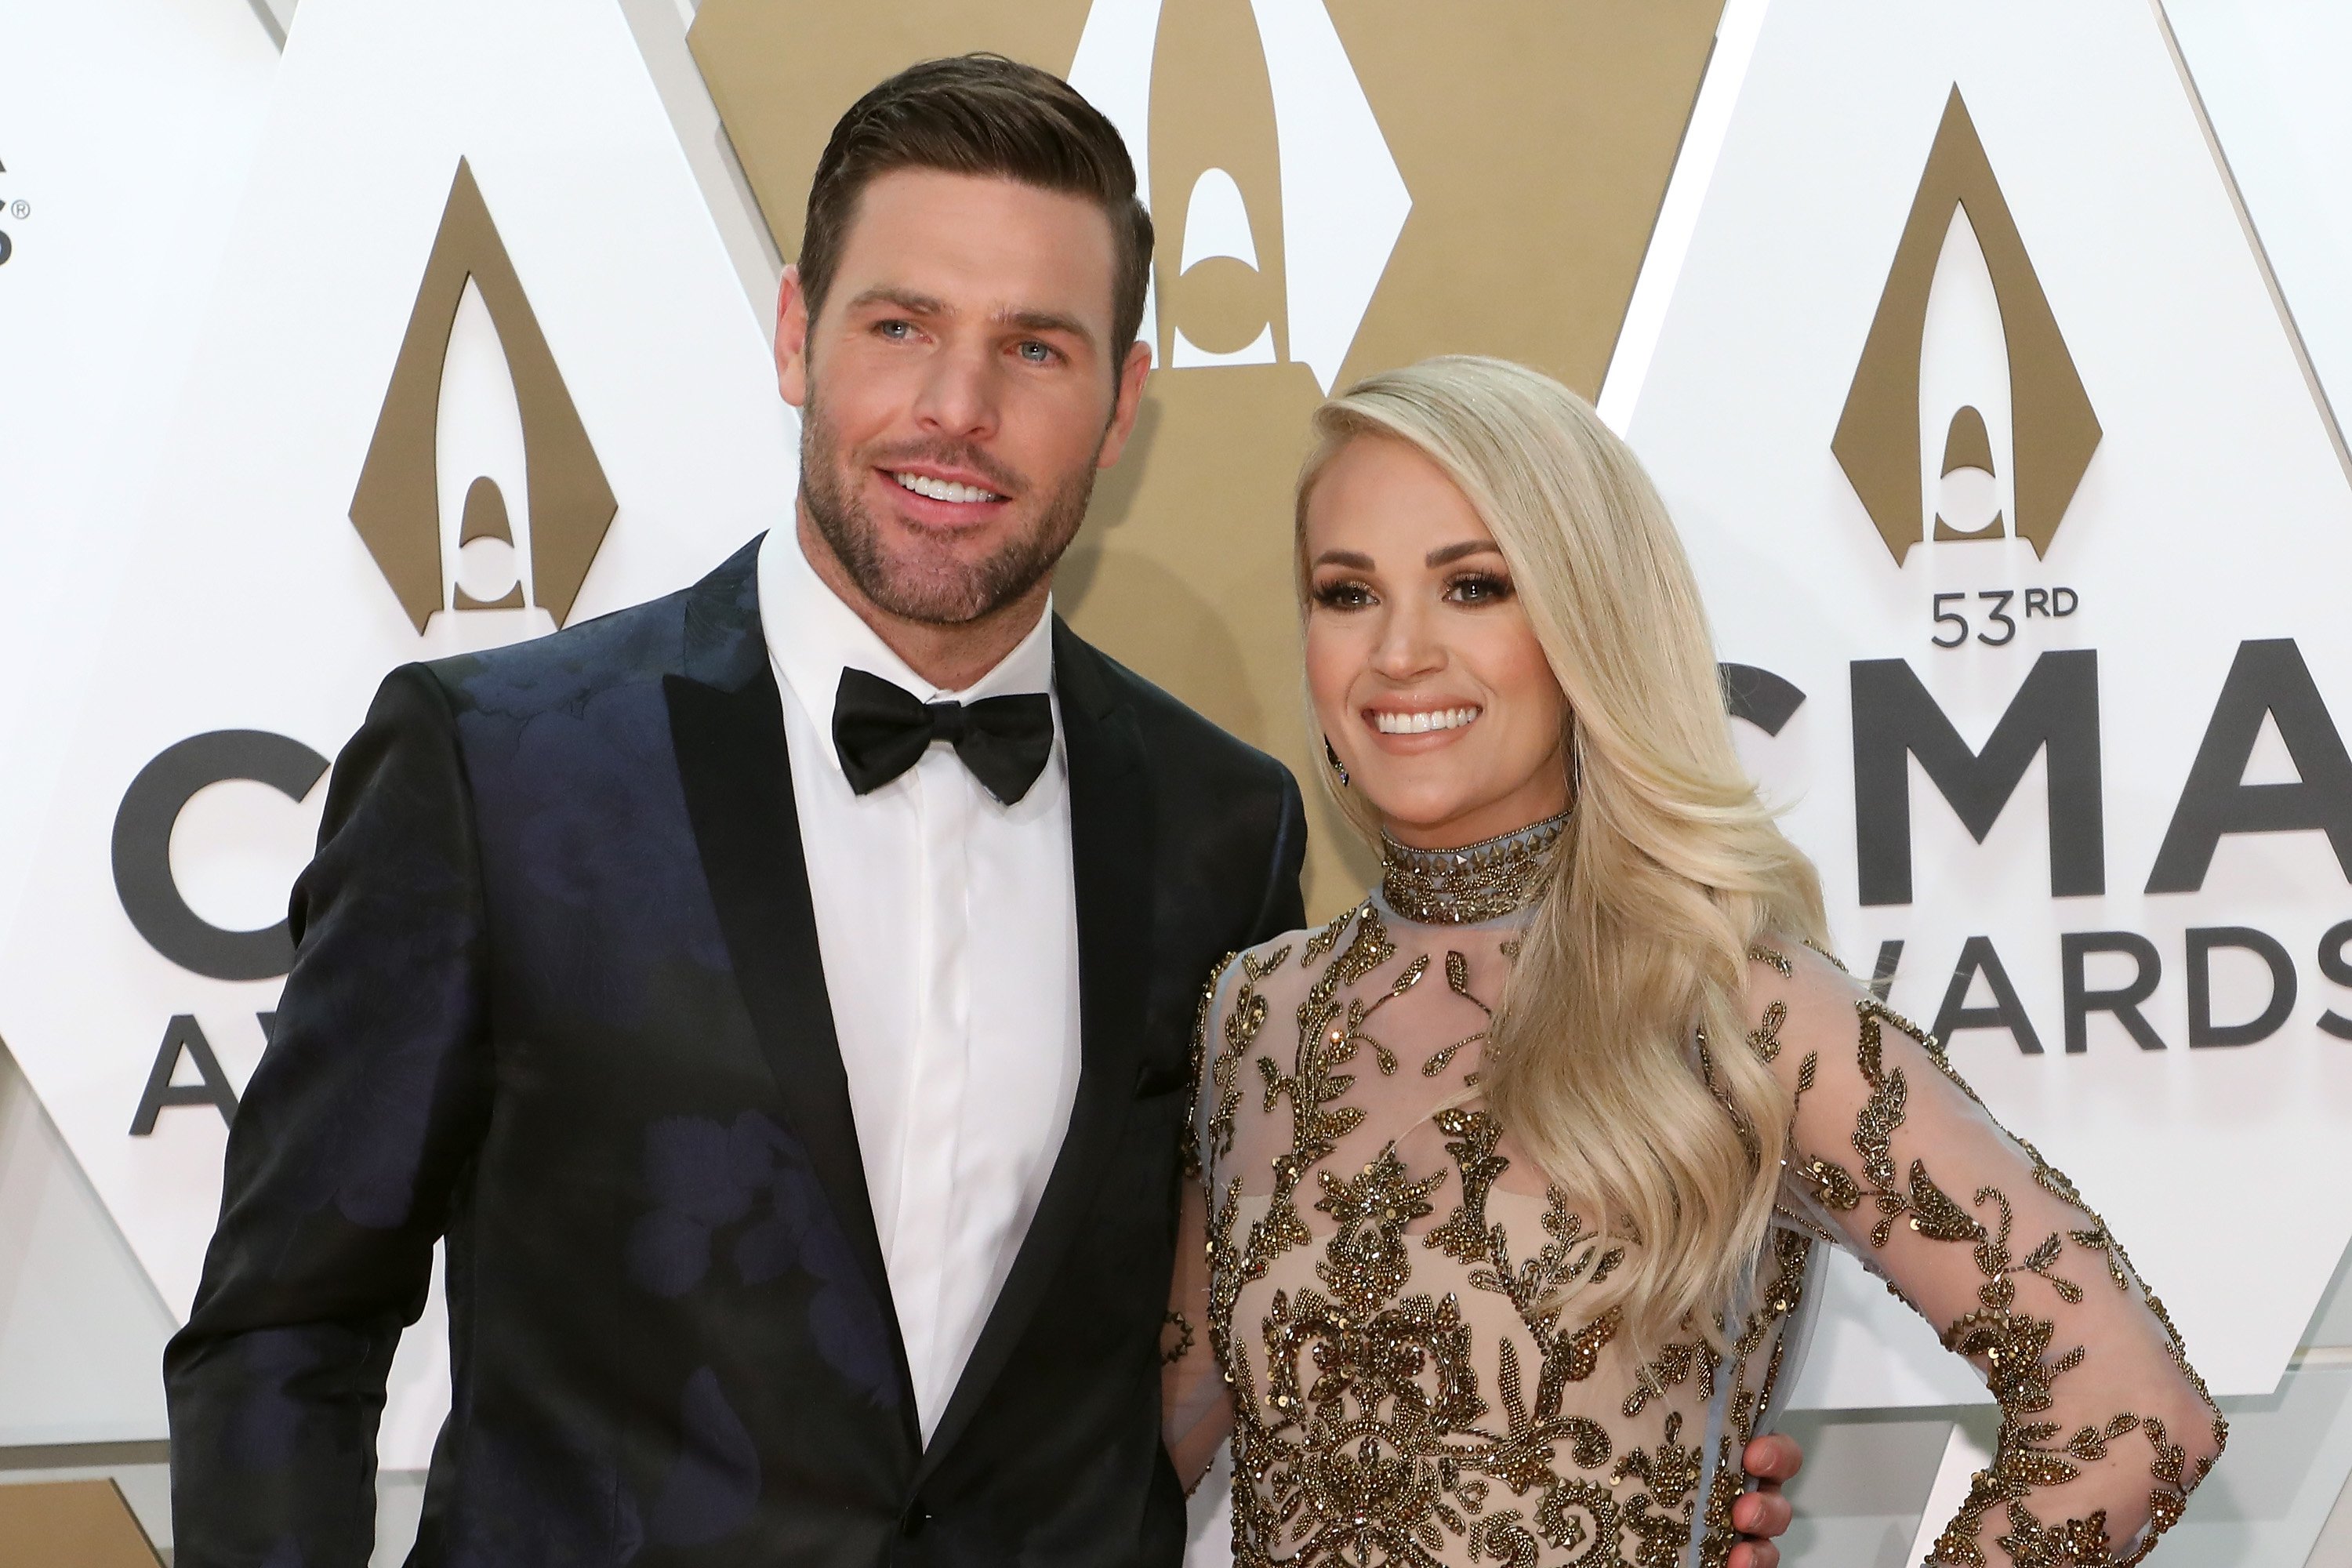 Mike Fisher and Carrie Underwood smiling on the carpet at the 53nd annual CMA Awards